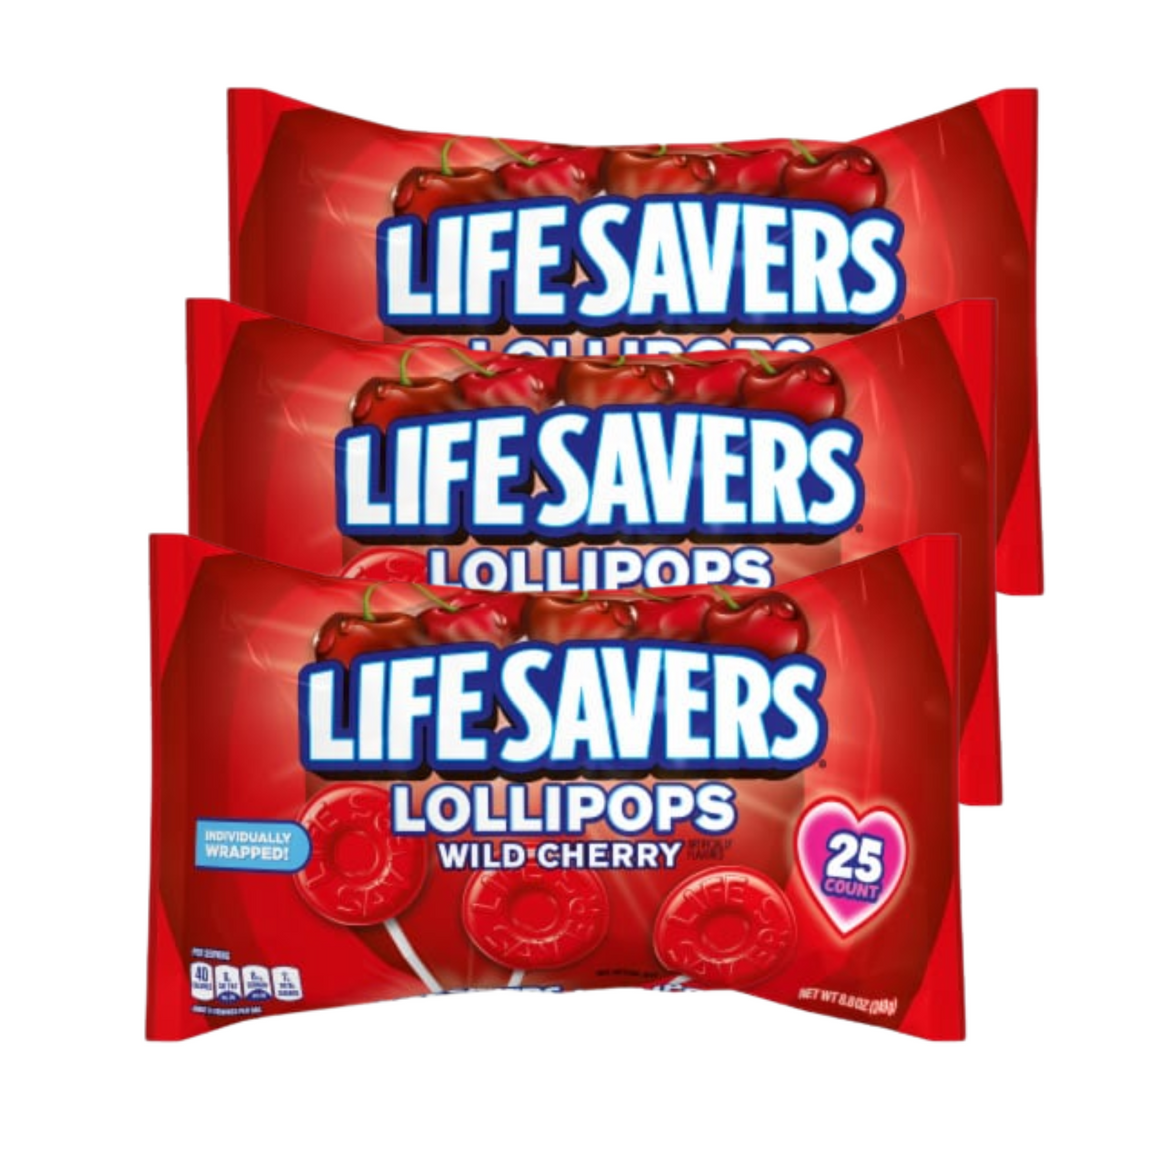 Lifesavers Lollipops Wild Cherry 25 Count 8.8 oz. Bag www.allcitycandy.com for fresh and delicious sweet candy treats